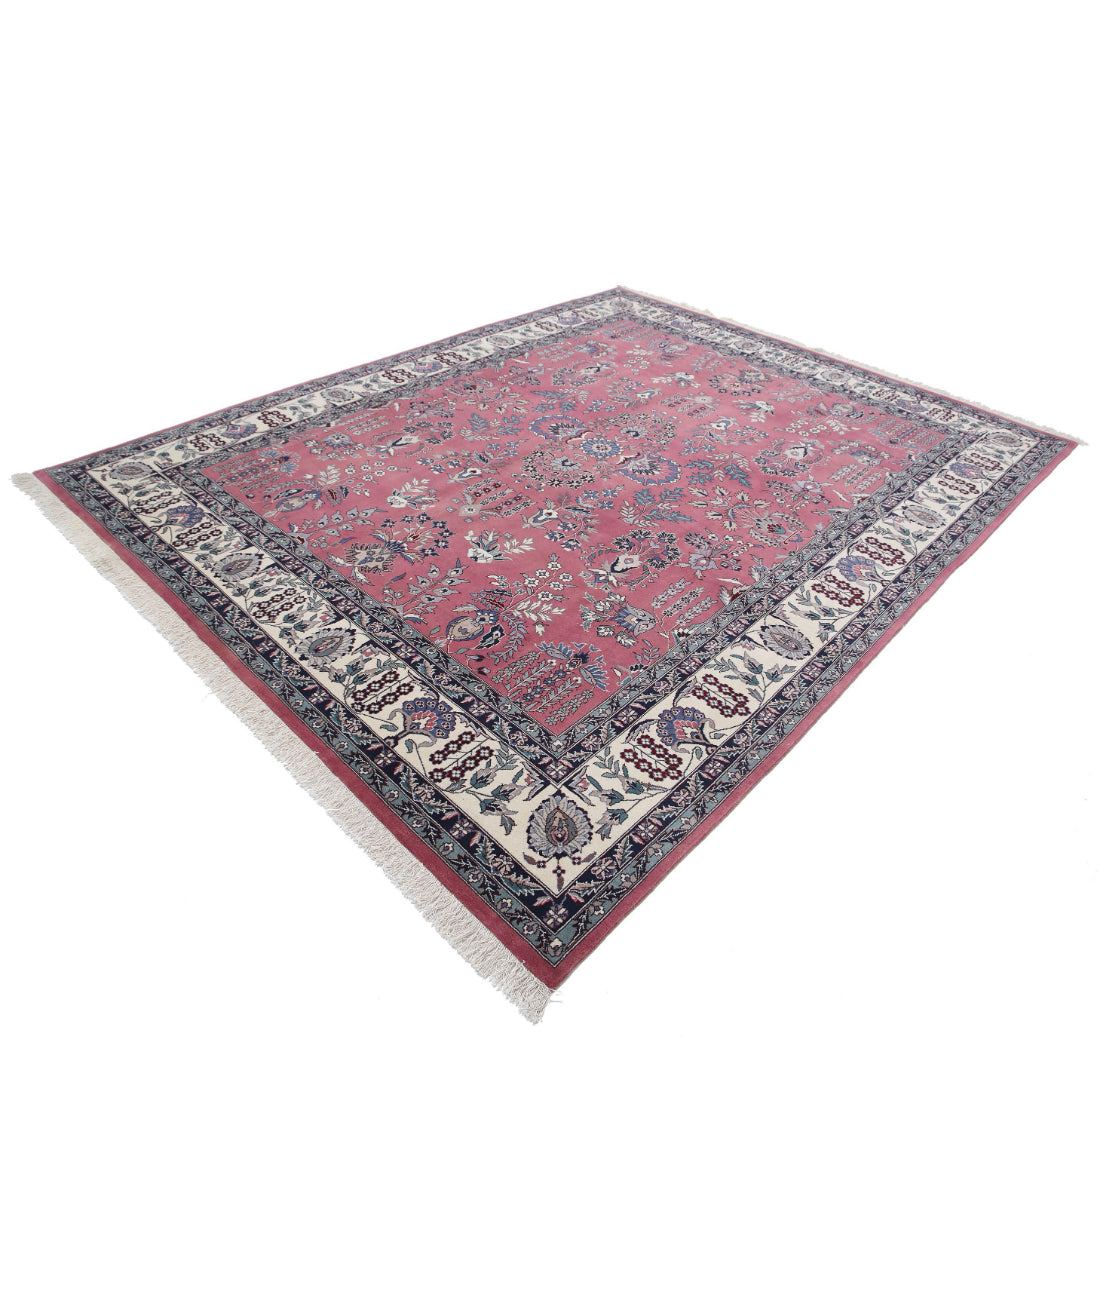 Hand Knotted Heritage Persian Style Wool Rug - 8'2'' x 10'2'' 8'2'' x 10'2'' (245 X 305) / Pink / Ivory